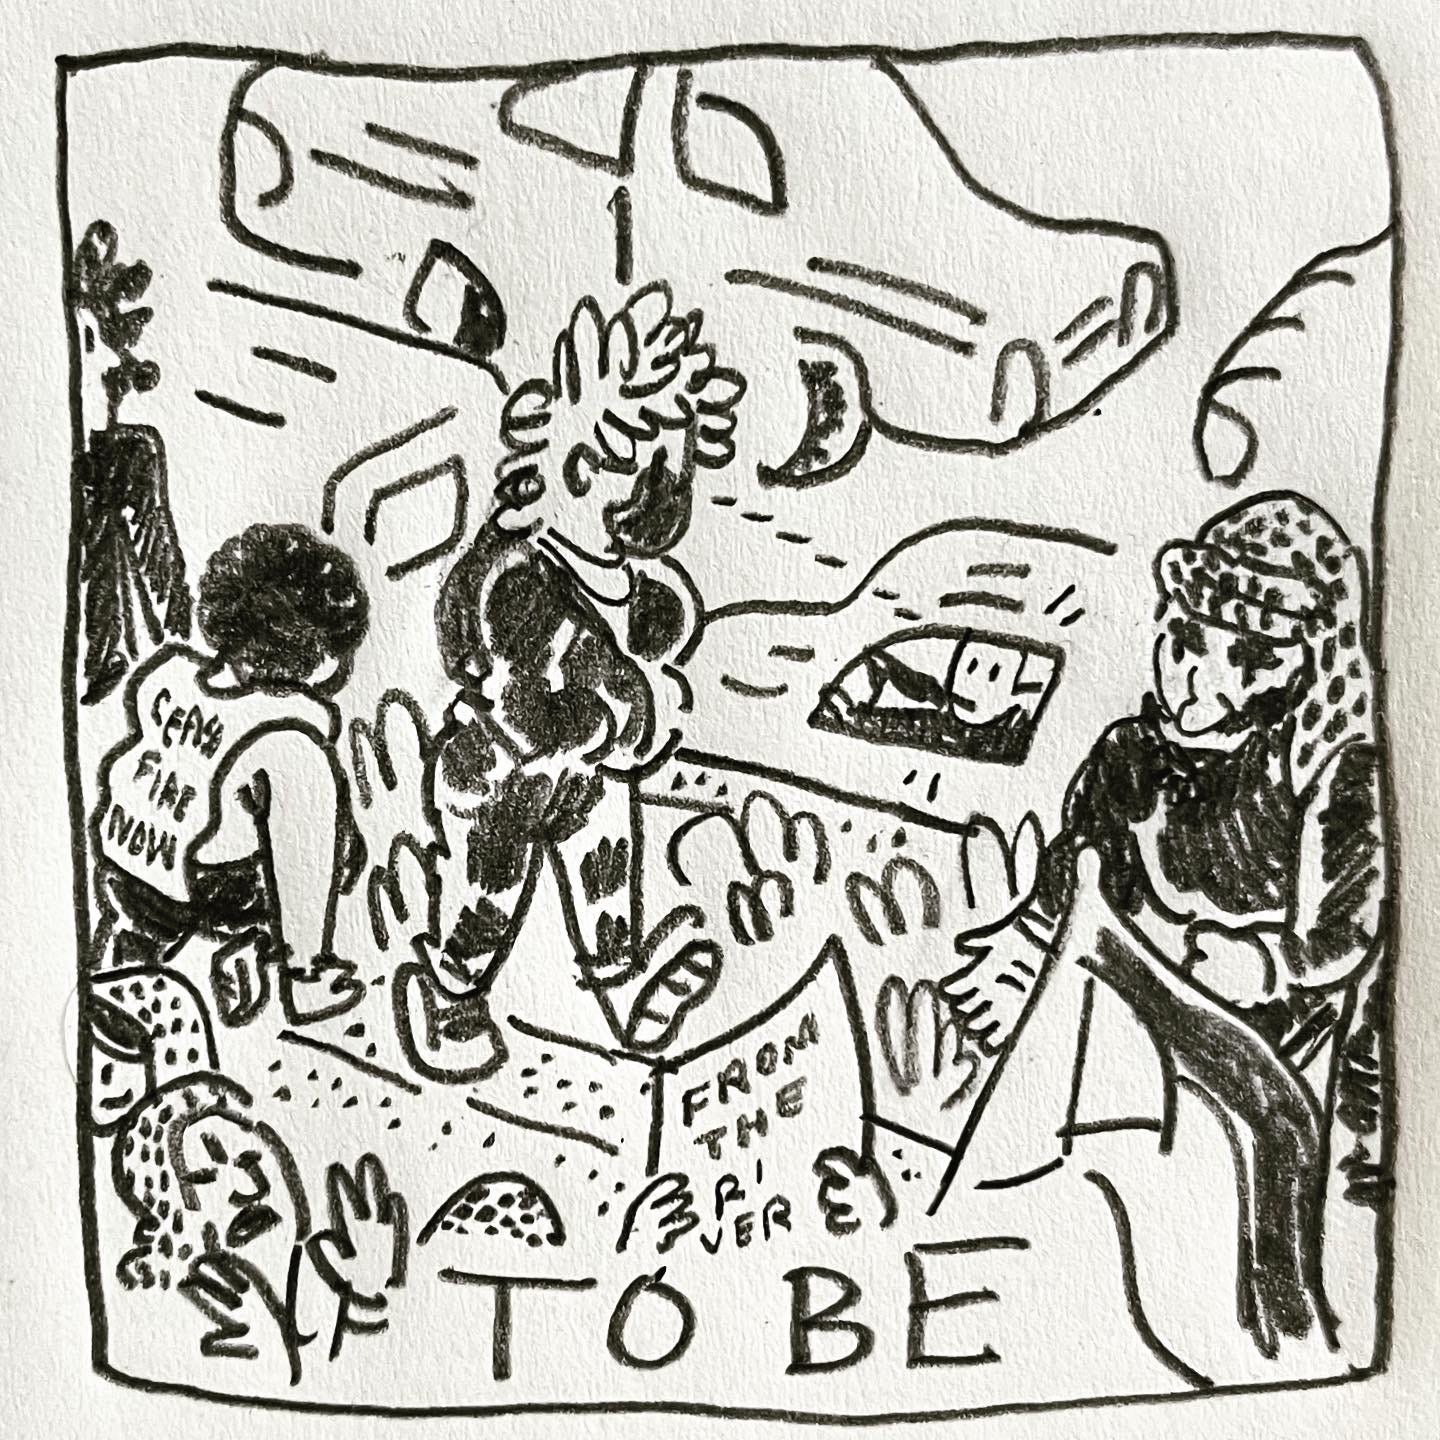 Panel 4: to be Image: a view from above. Looking down, we see people chanting, wearing keffiyehs and holding signs reading “CEASE FIRE NOW” and “FROM THE RIVER TO THE SEA”. Lark is looking down over the concrete barrier at cars driving past on the other side of the street. They make eye contact with someone in the driver seat of a passing car.